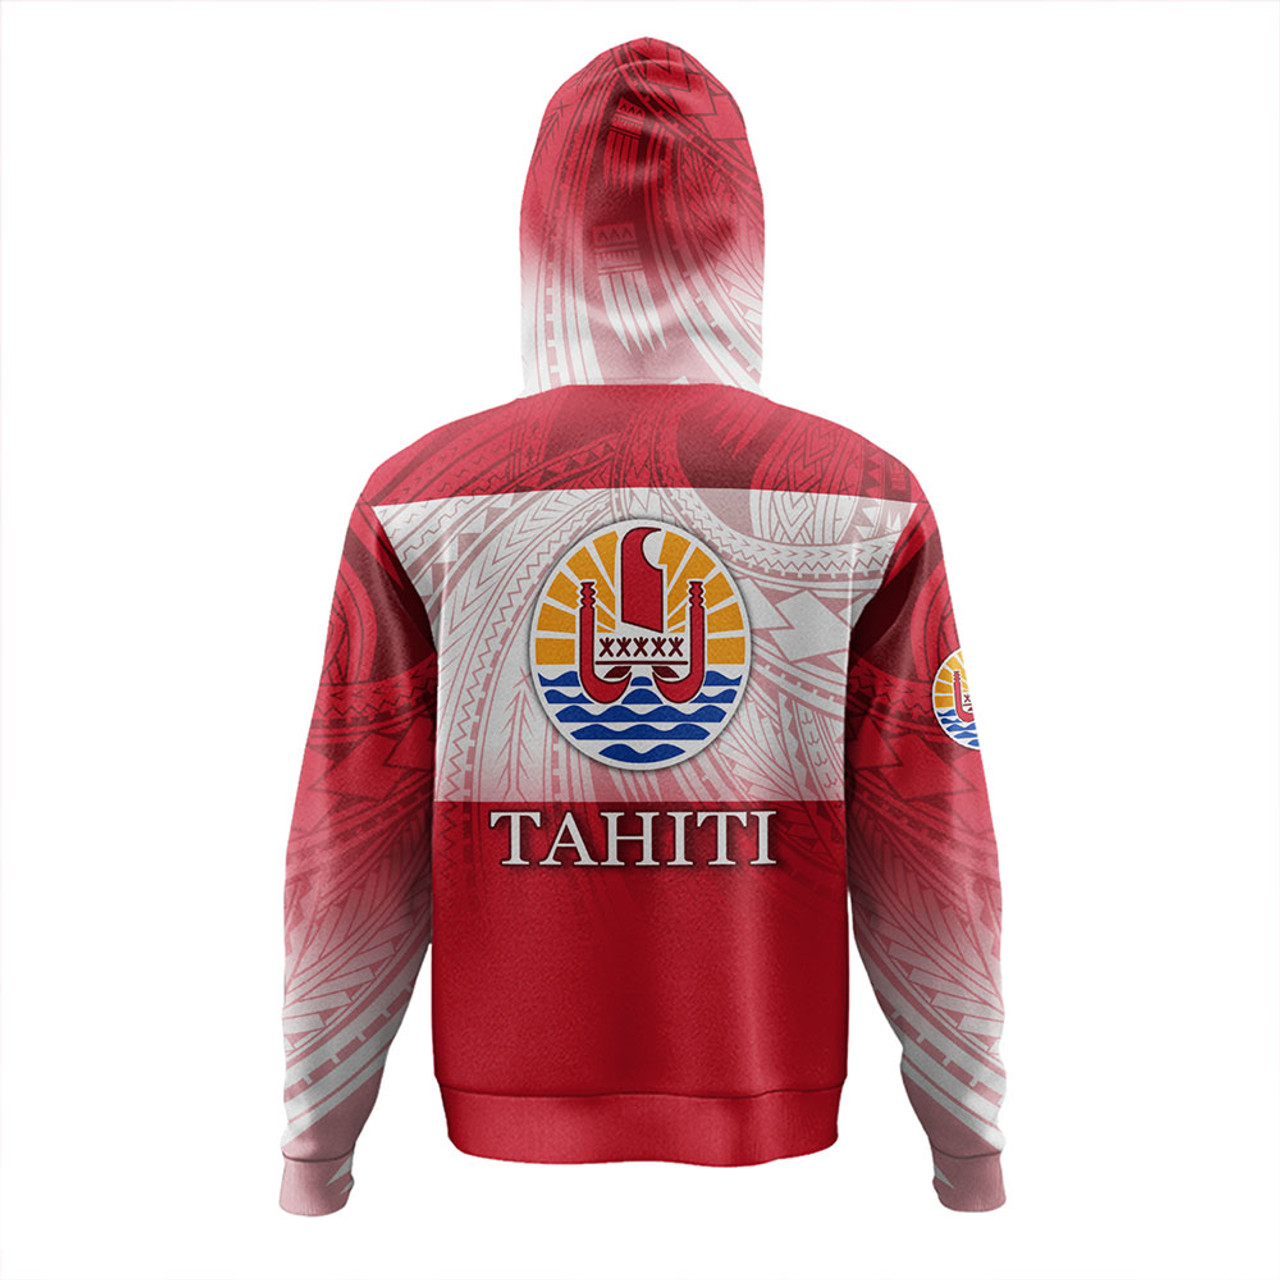 Tahiti Hoodie - Flag Color With Traditional Patterns